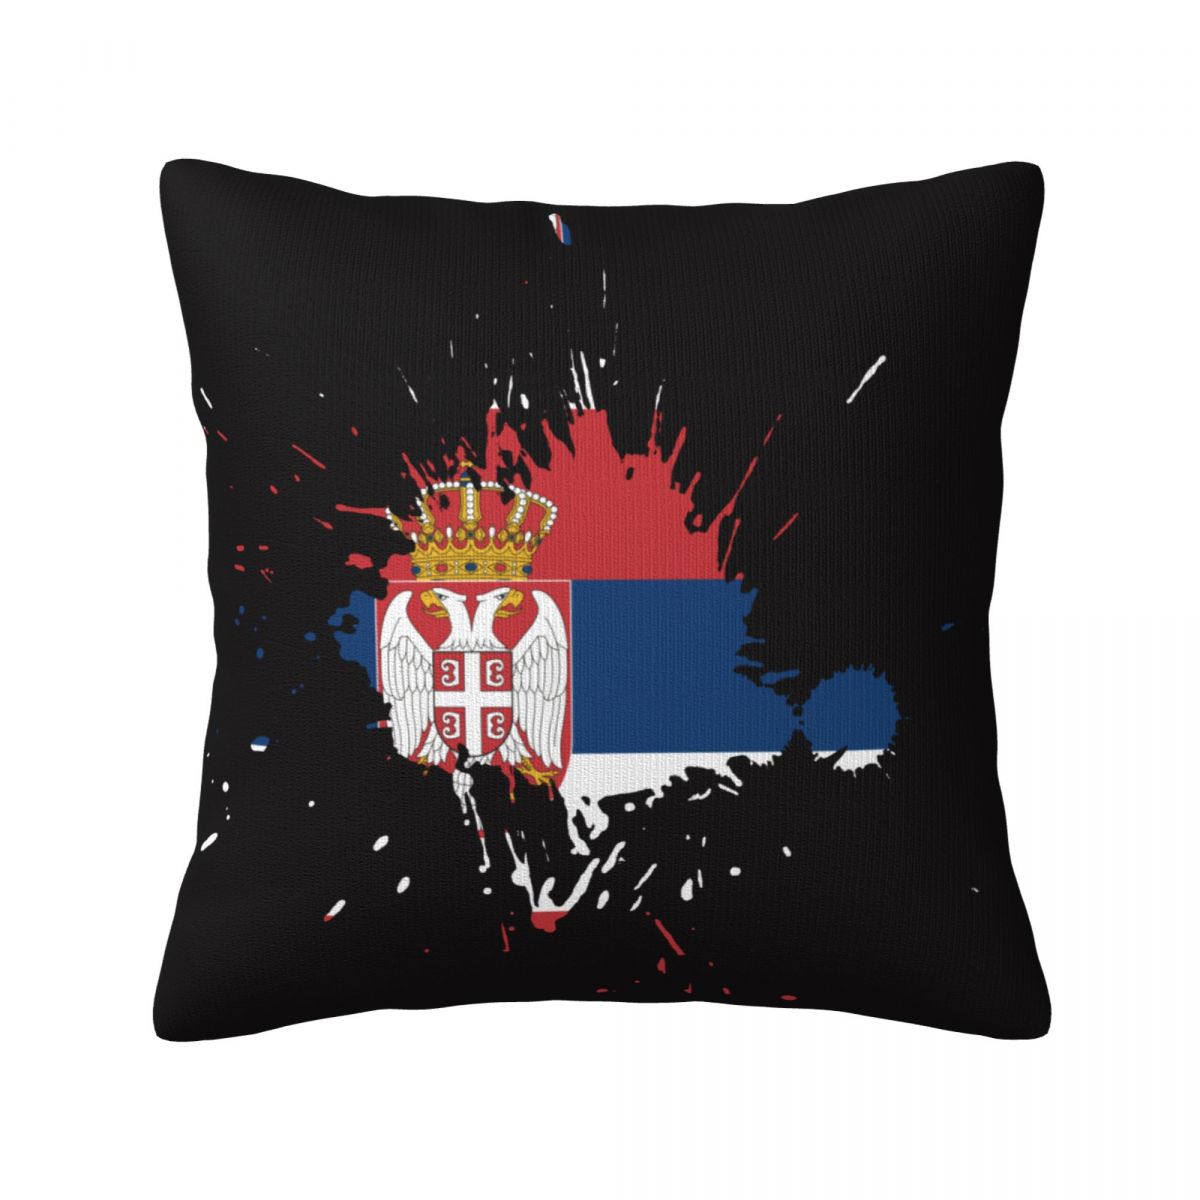 Serbia Ink Spatter Pillow Covers 18x18 Inch